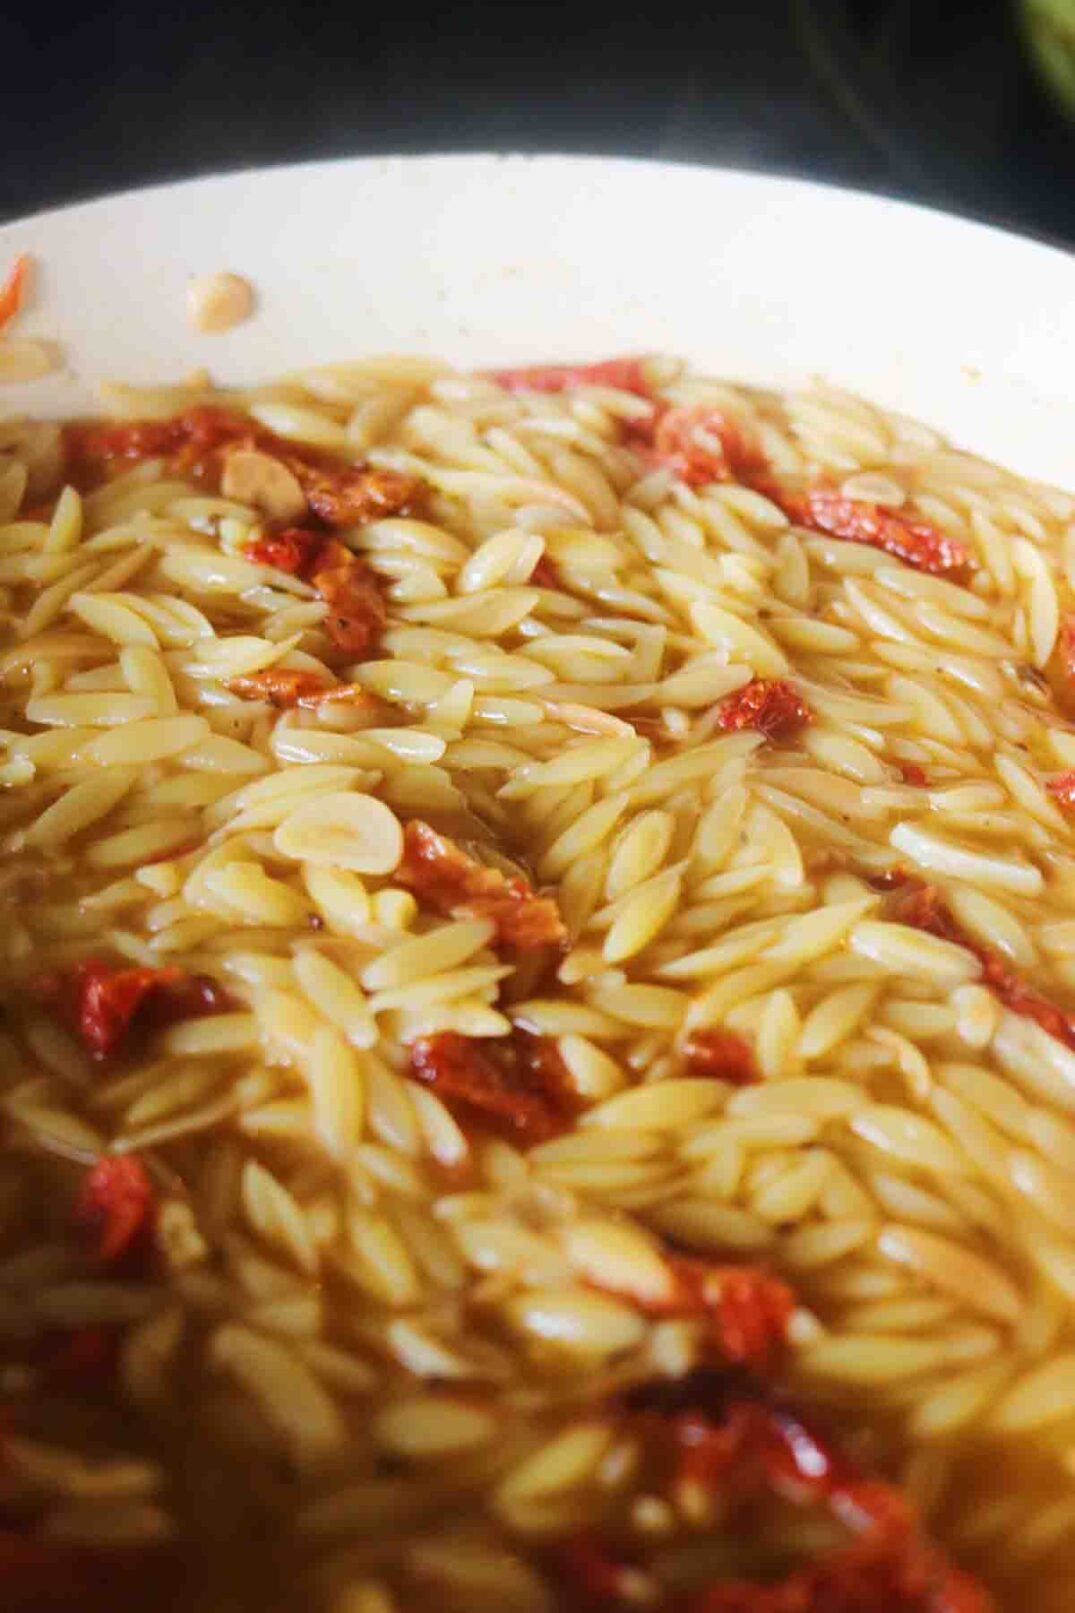 orzo and sun dried tomatoes cooking in a soupy broth.